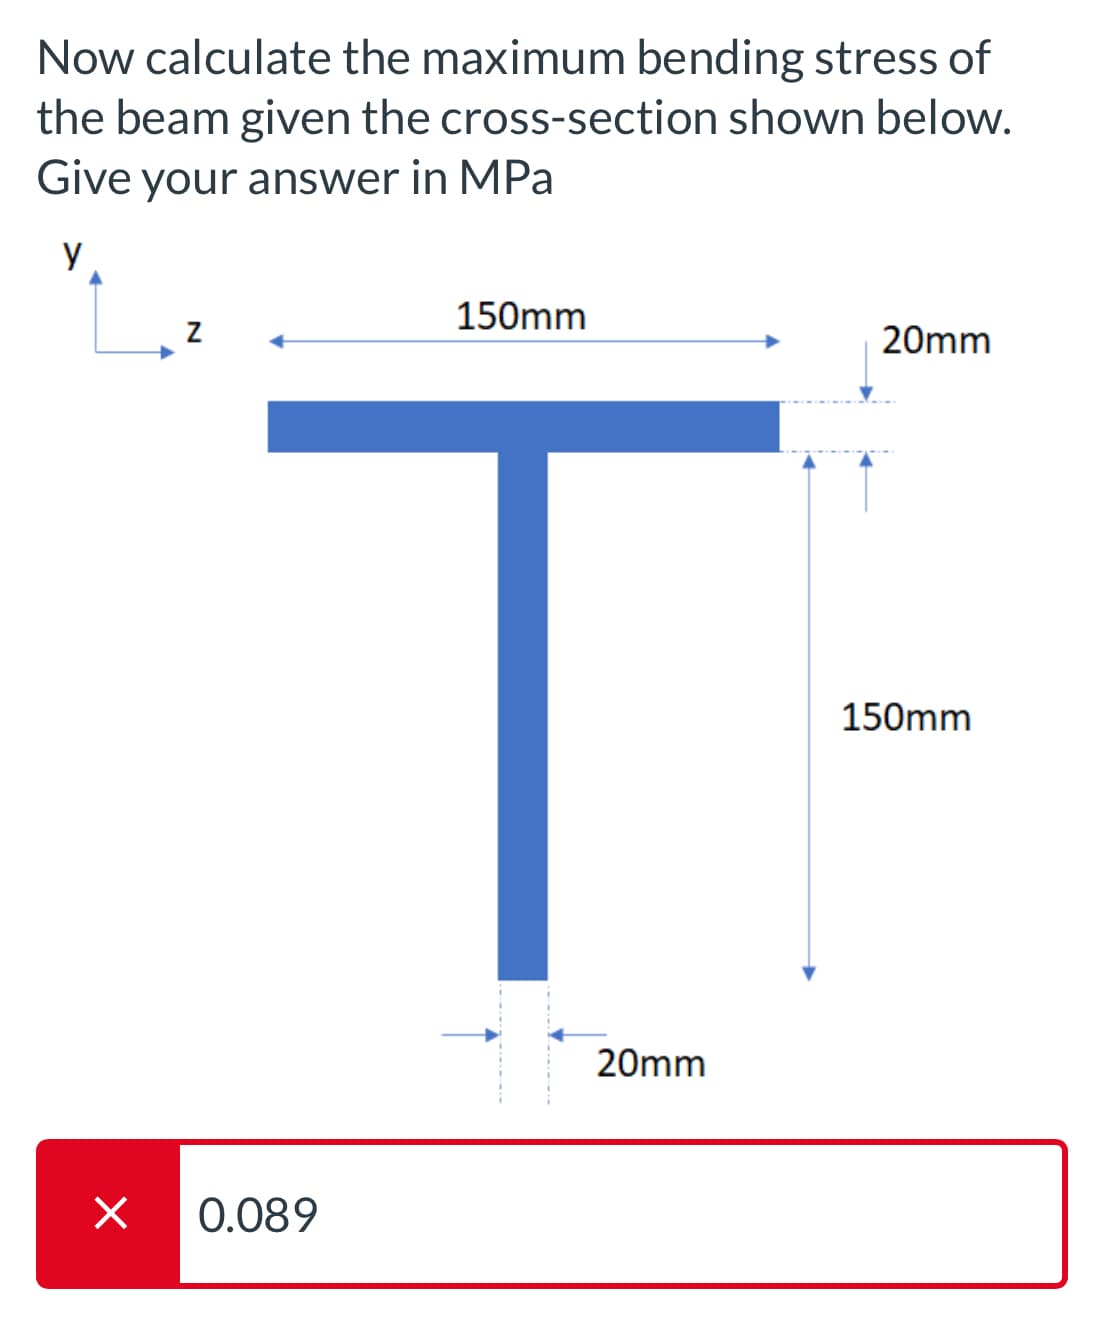 Х
Now calculate the maximum bending stress of
the beam given the cross-section shown below.
Give your answer in MPa
0.089
Z
150mm
20mm
T
150mm
20mm